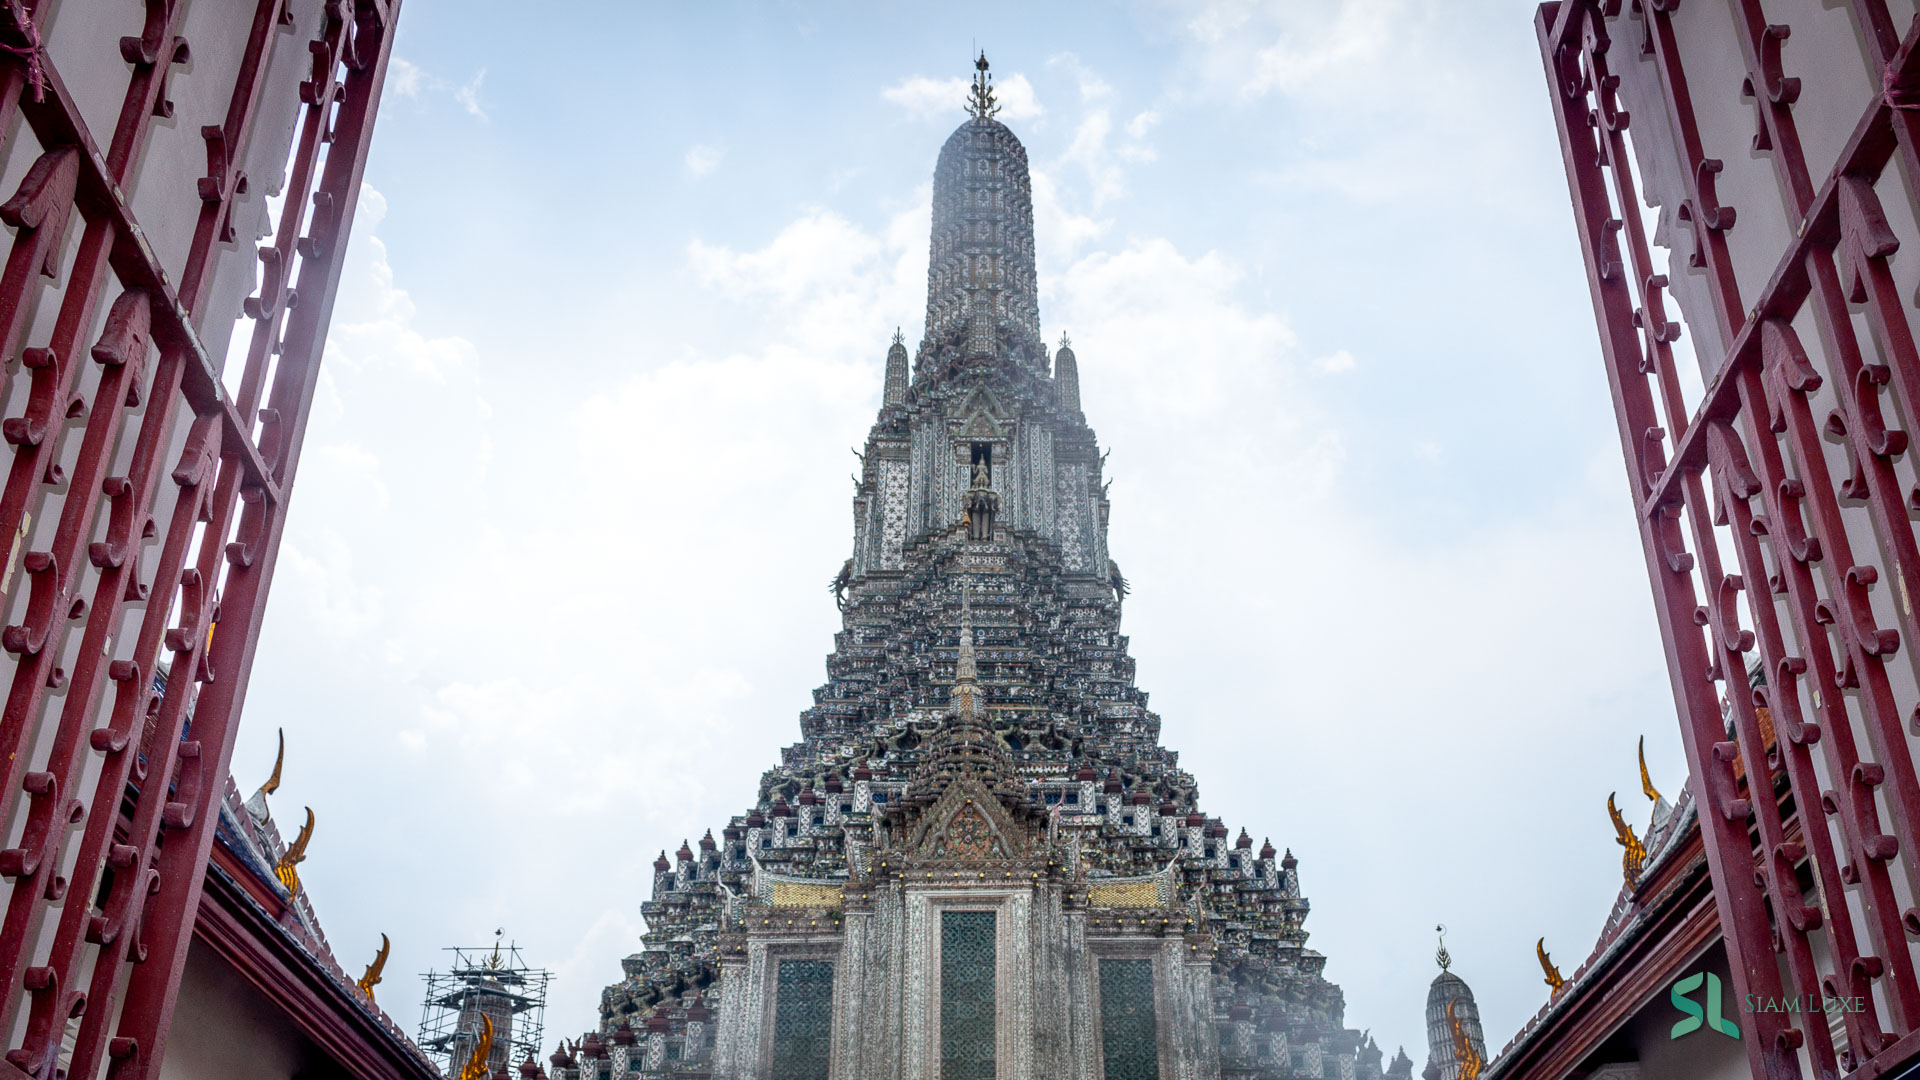 Wat Arun is one of the best temples for photo shooting in Bangkok